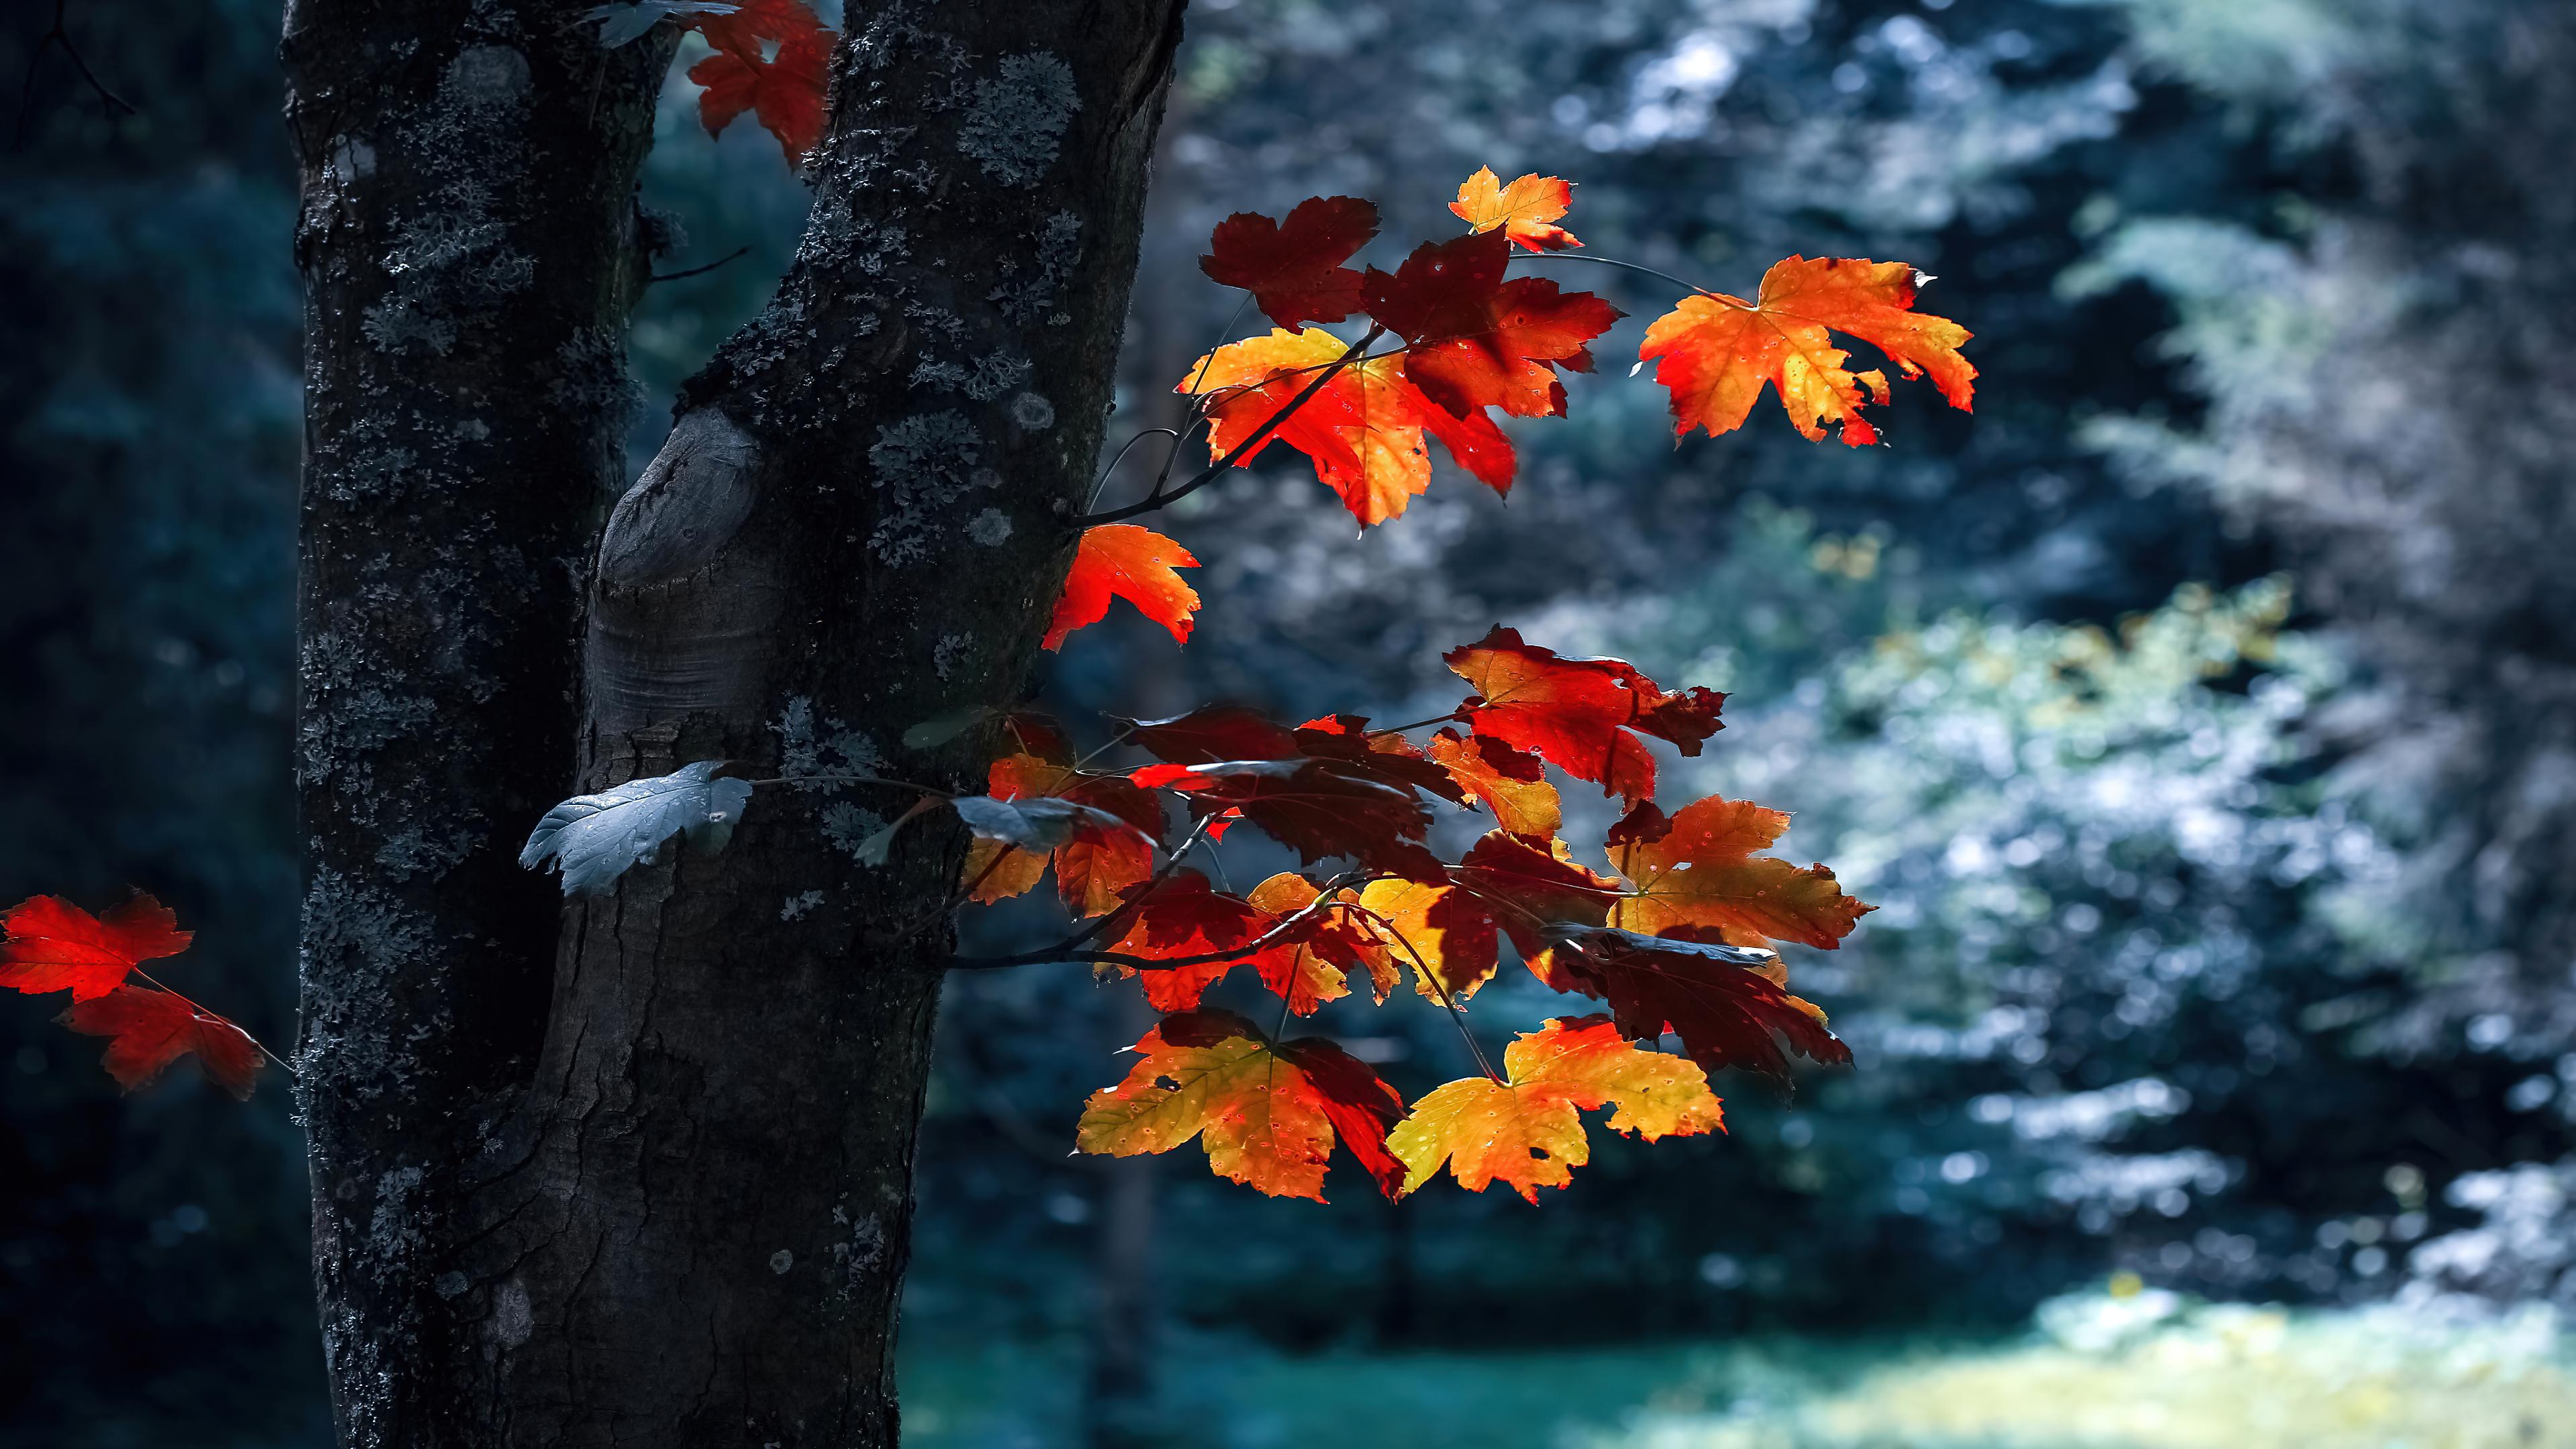 Autumn 4K wallpaper for your desktop or mobile screen free and easy to download